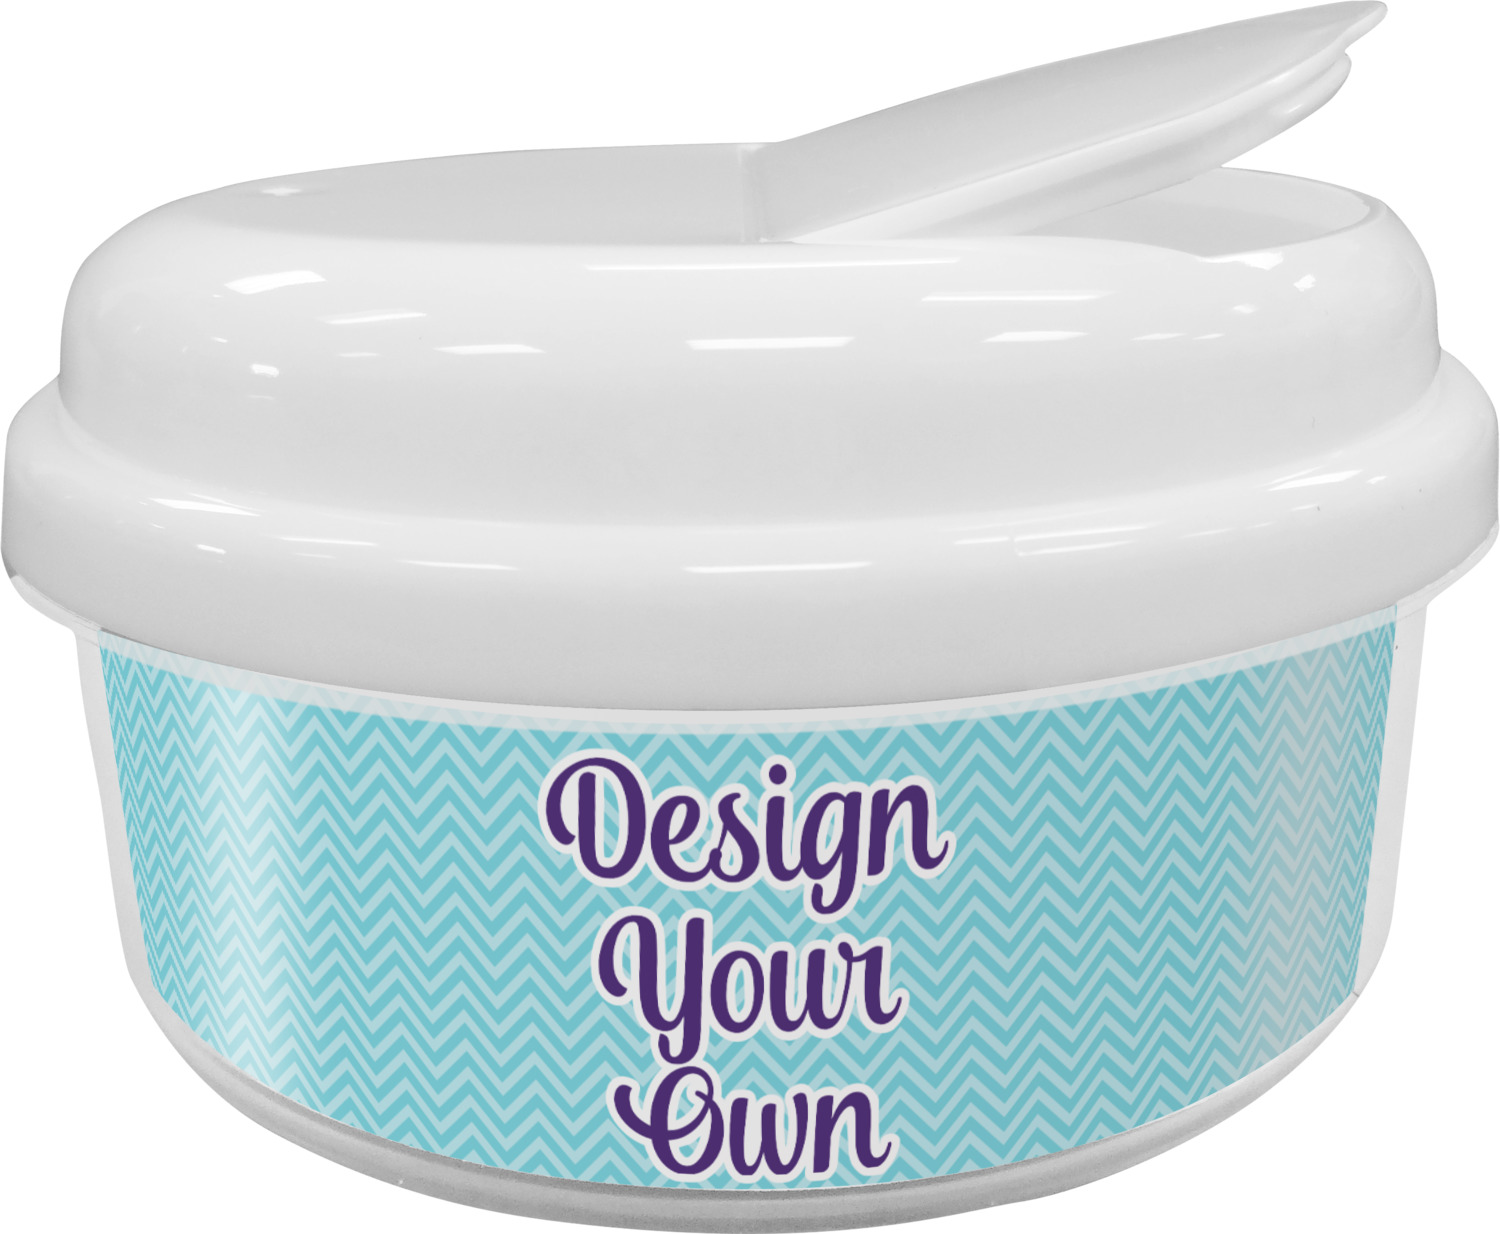 https://www.youcustomizeit.com/common/MAKE/965833/Design-Your-Own-Snack-Container-Personalized.jpg?lm=1659777491